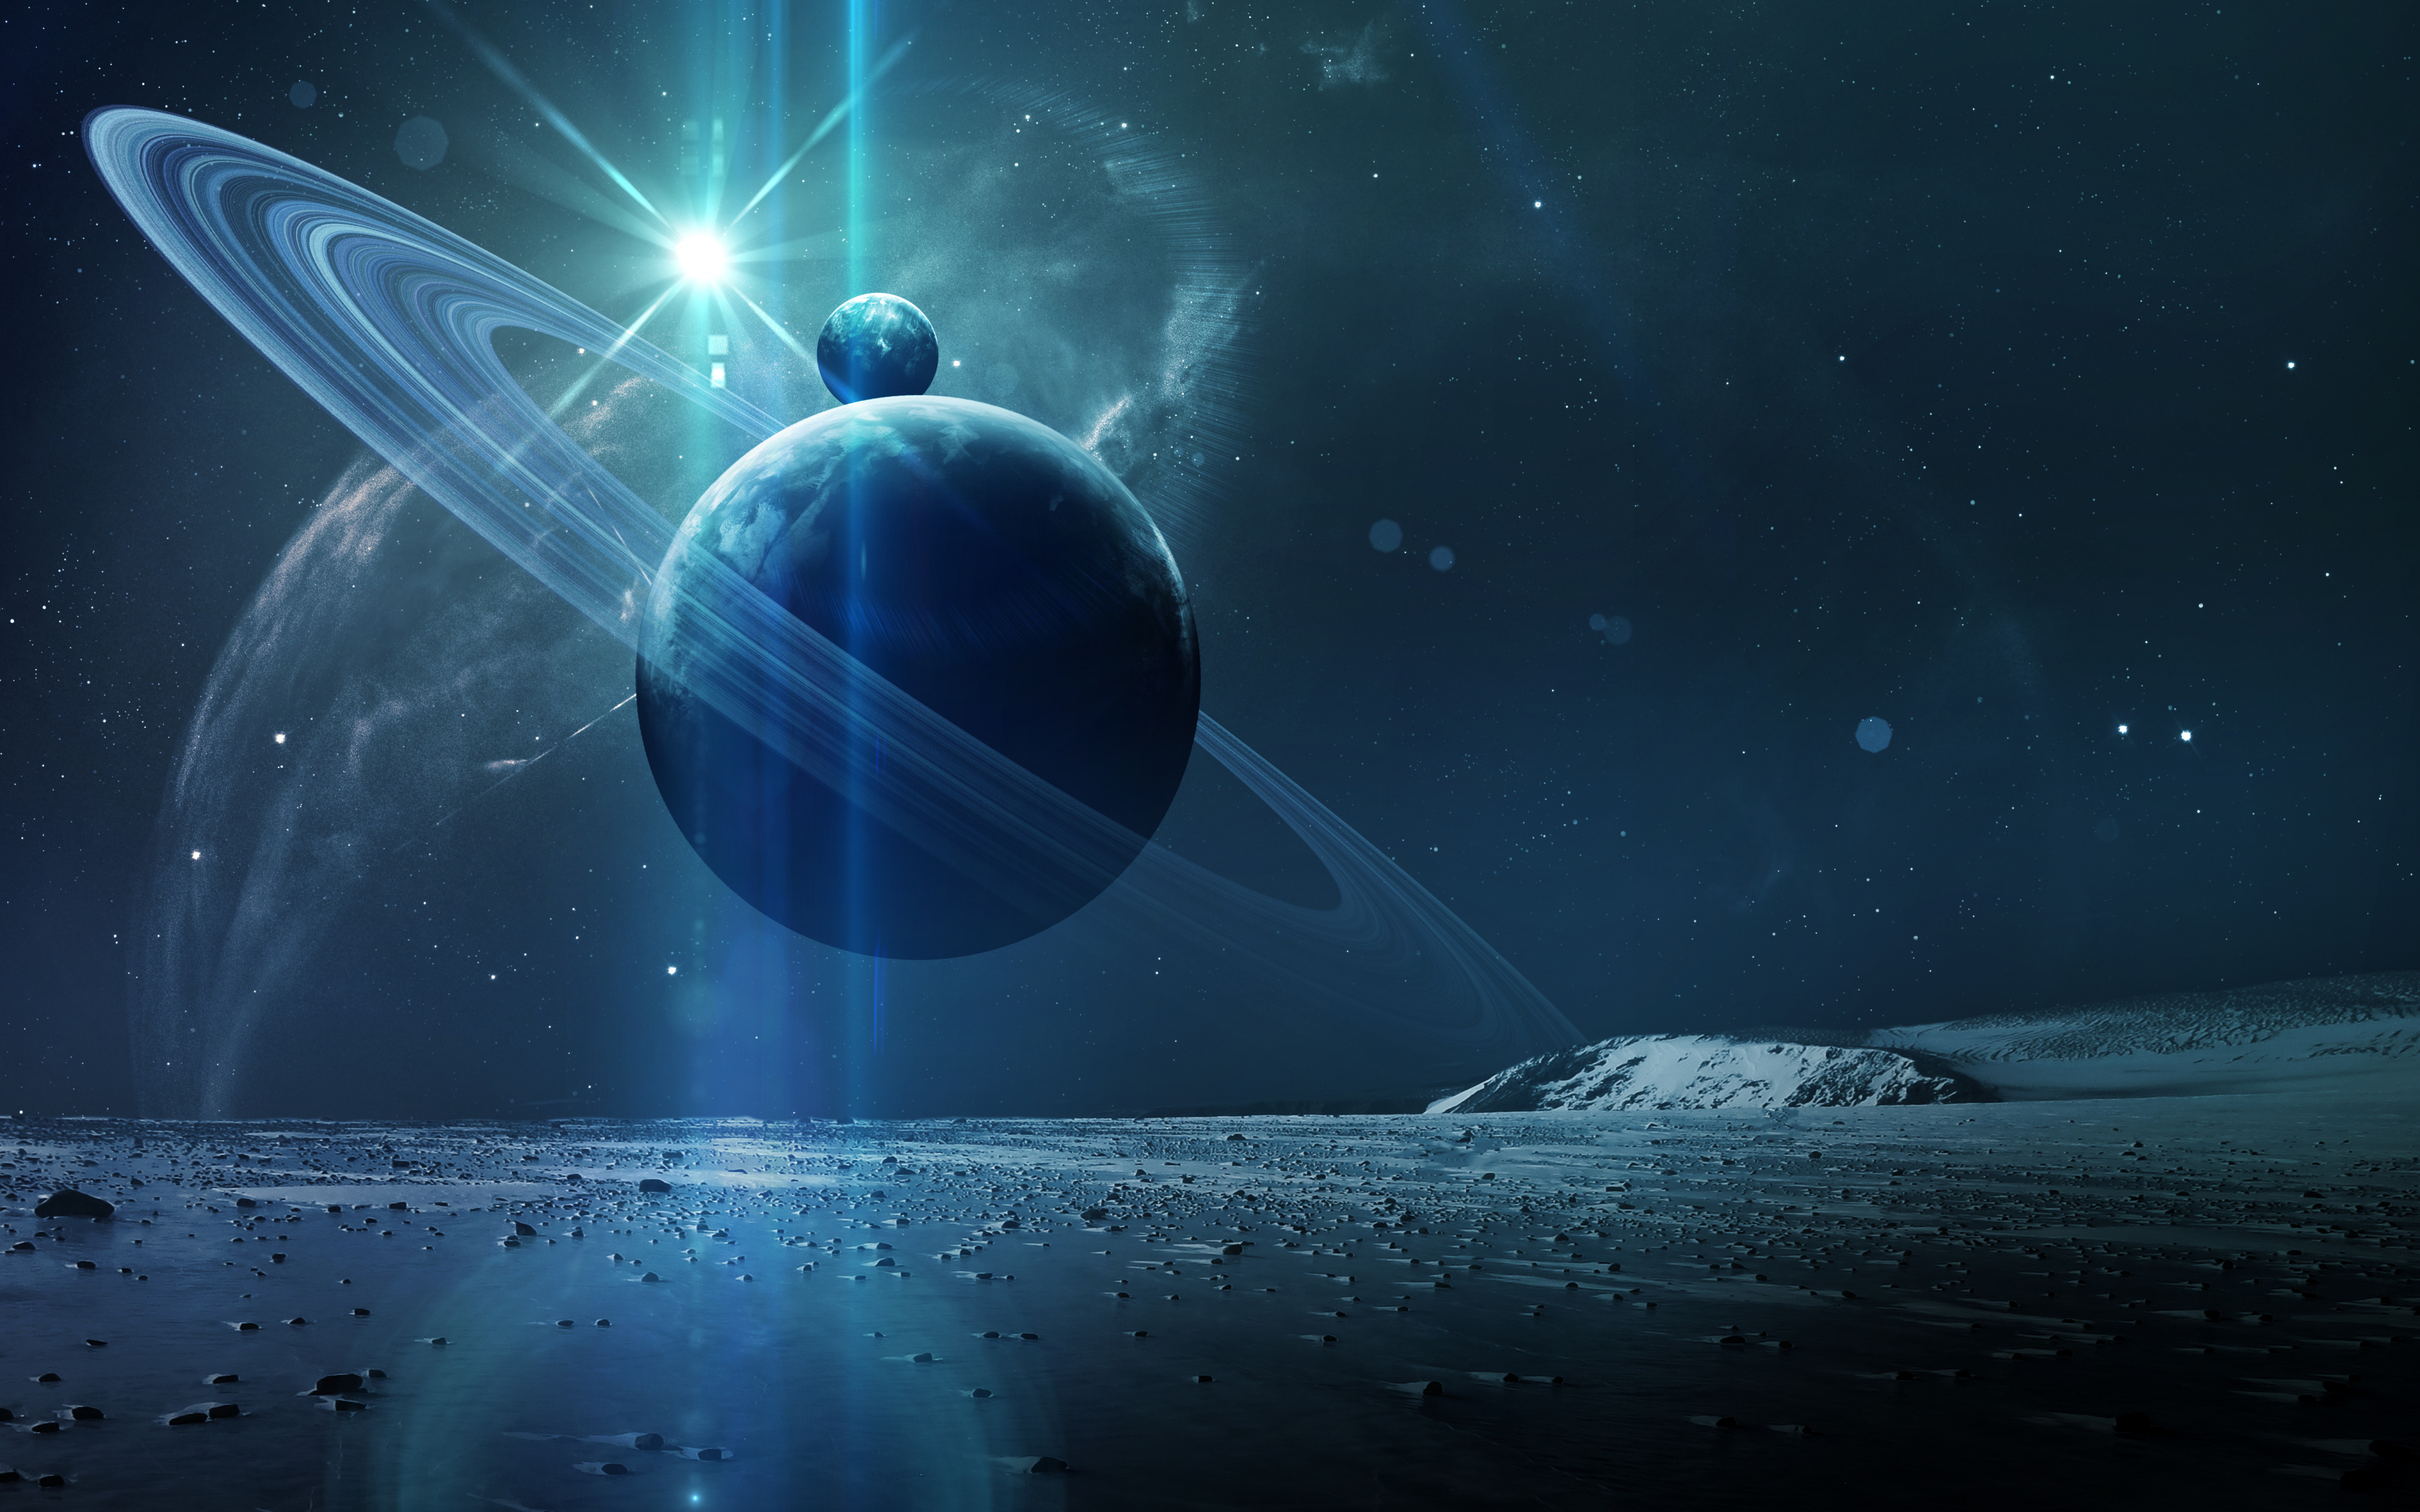 Wallpaper Planets, Landscape, Space - Sci Fi Planet With Rings - HD Wallpaper 